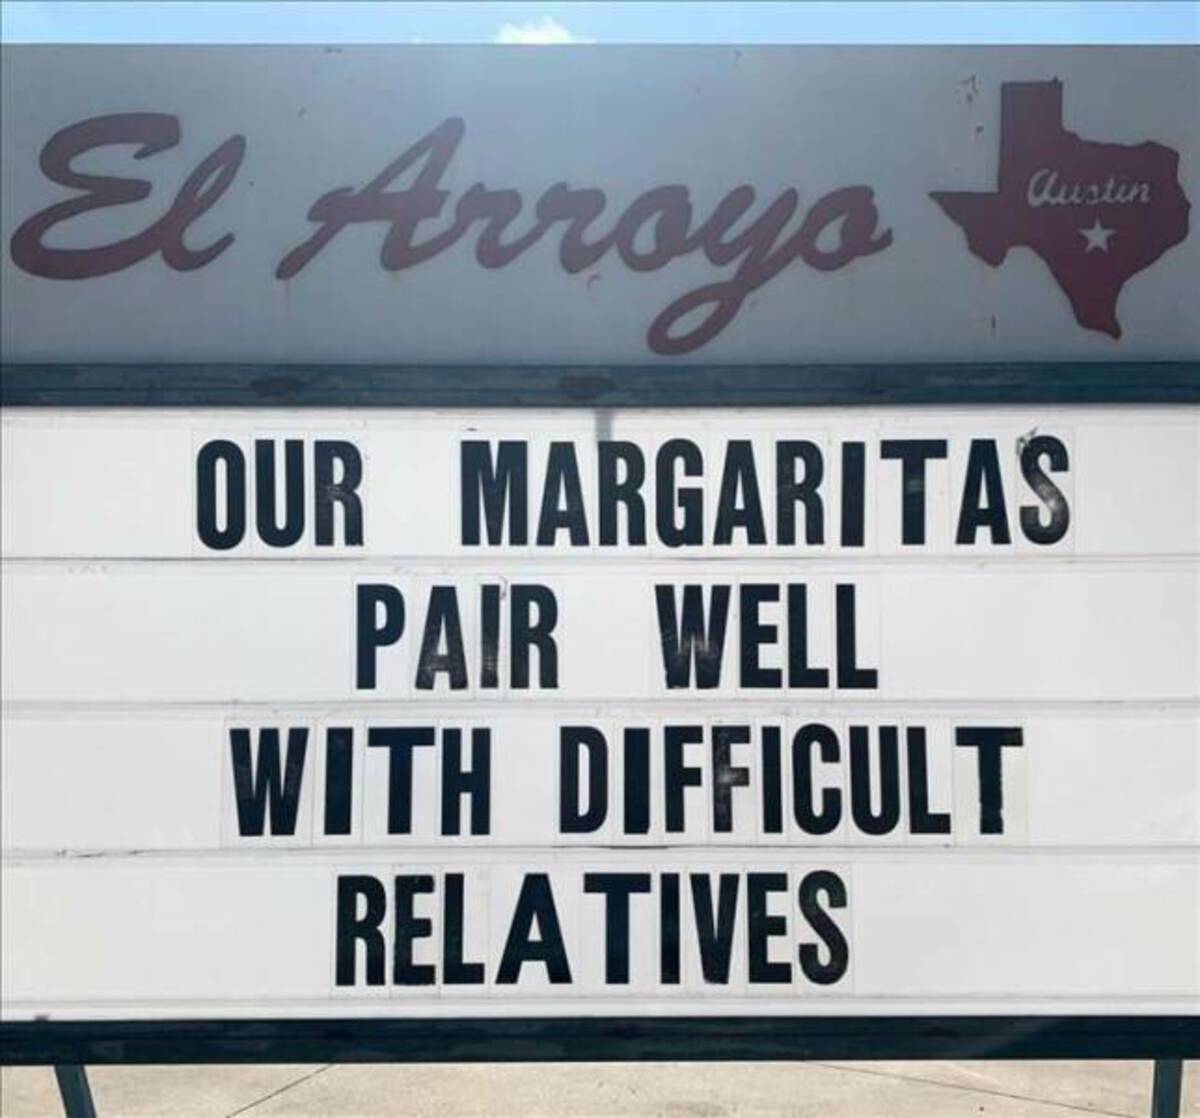 signage - El Arroyo Austin Our Margaritas Pair Well With Difficult Relatives